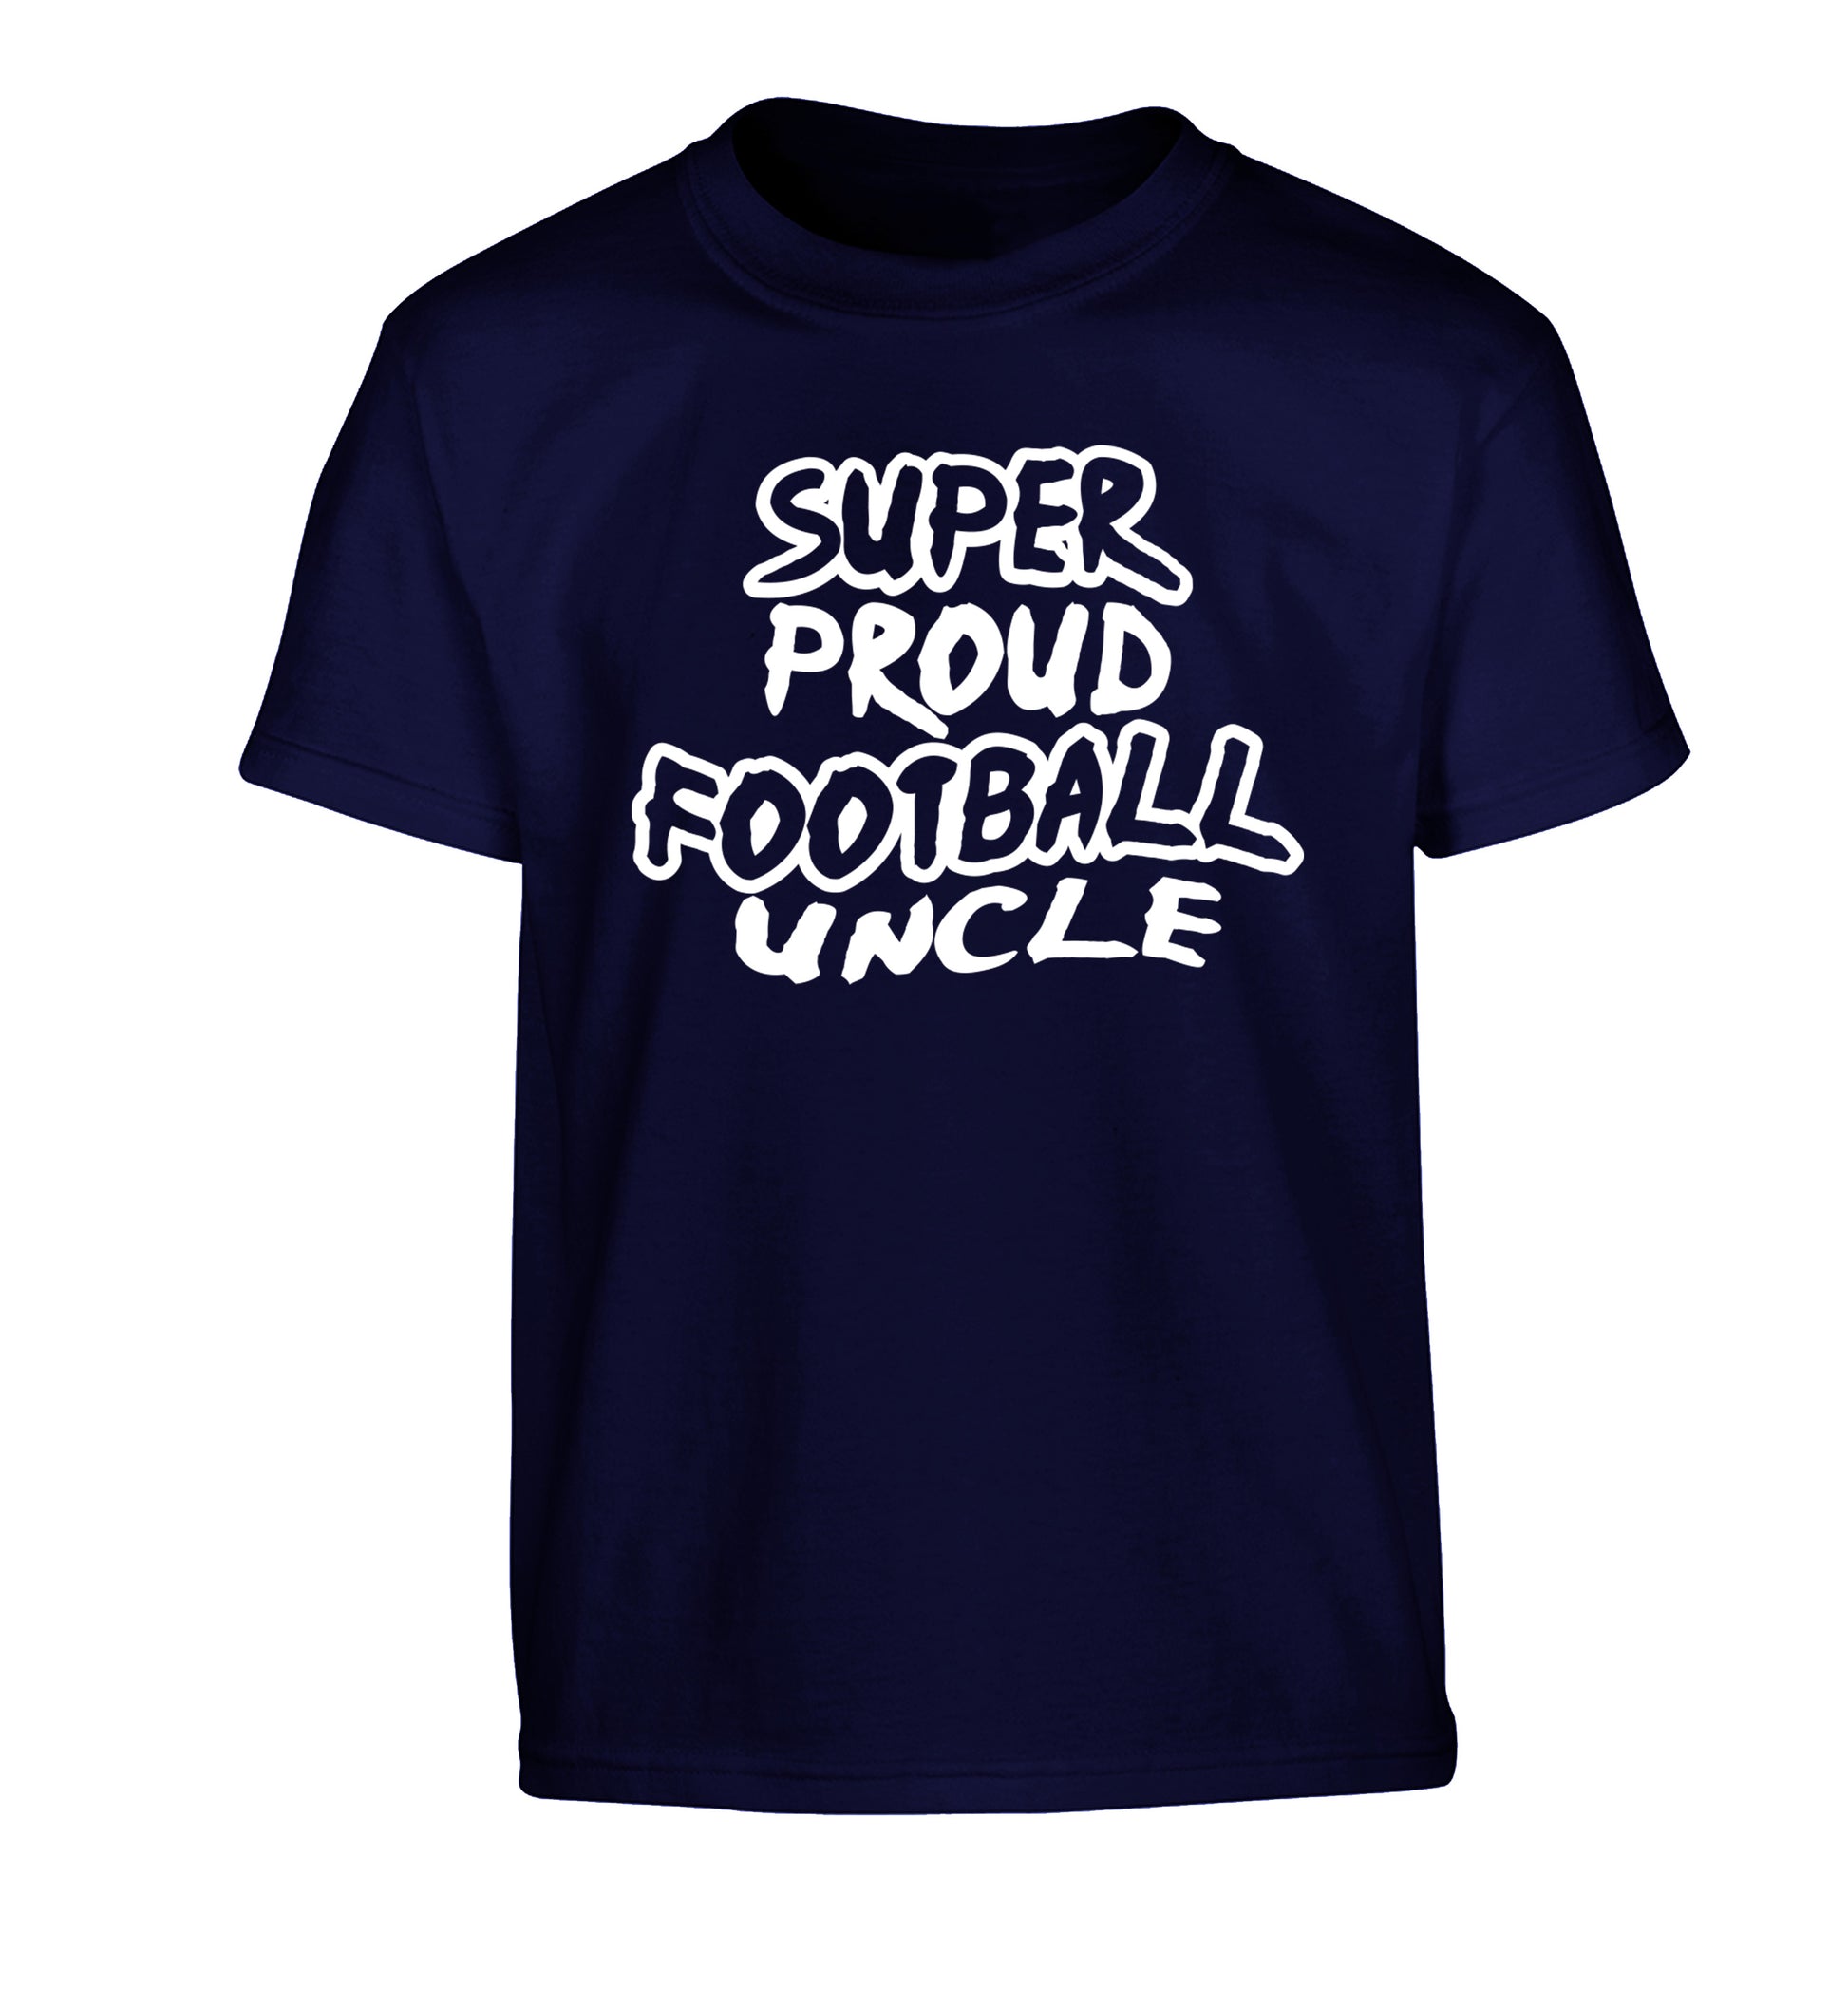 Super proud football uncle Children's navy Tshirt 12-14 Years